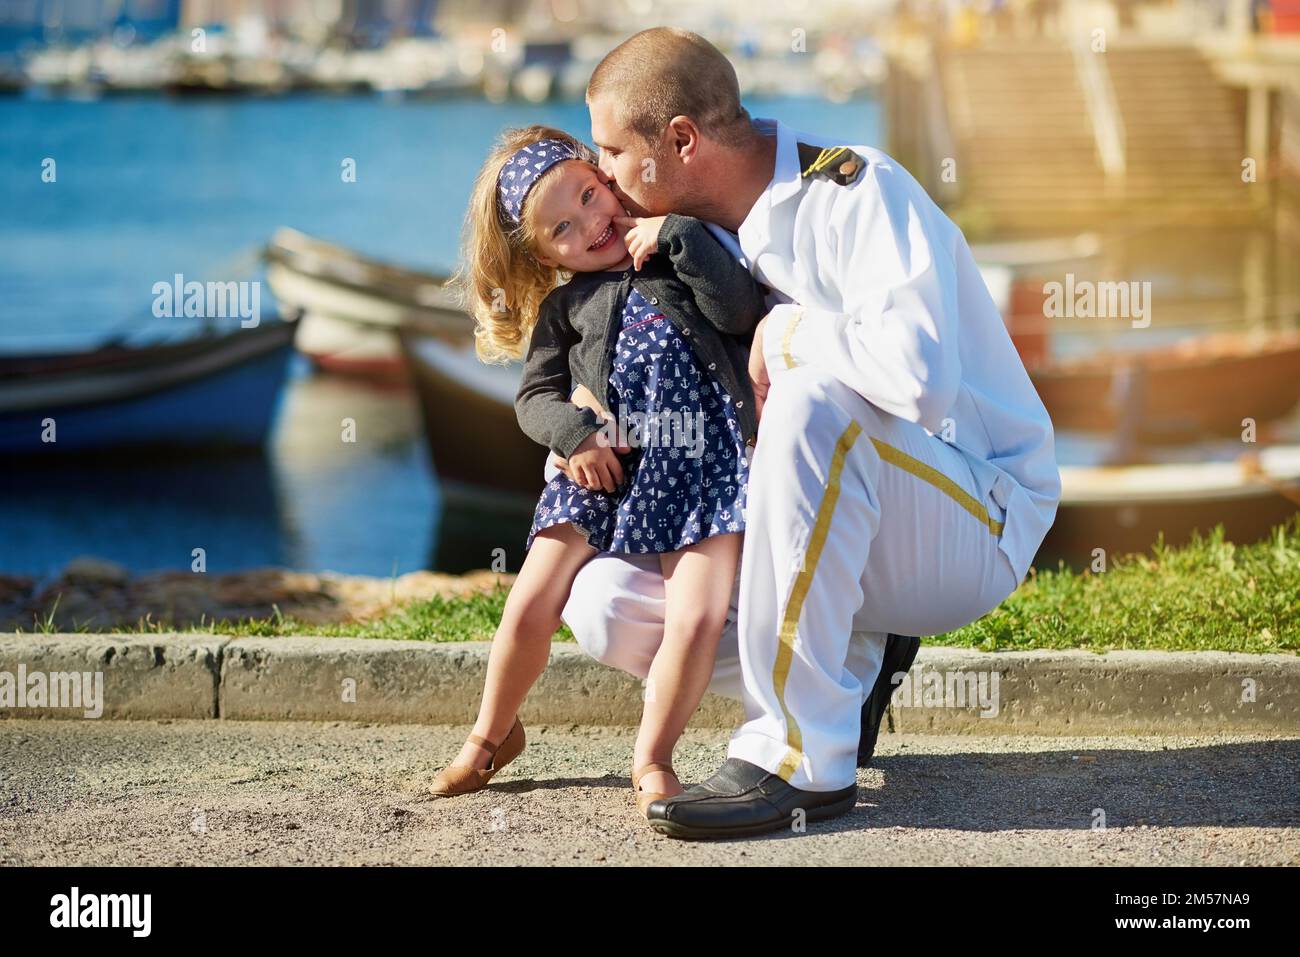 Youll always be my little girl. Portrait of a father in a navy uniform posing with his little girl on the dock. Stock Photo